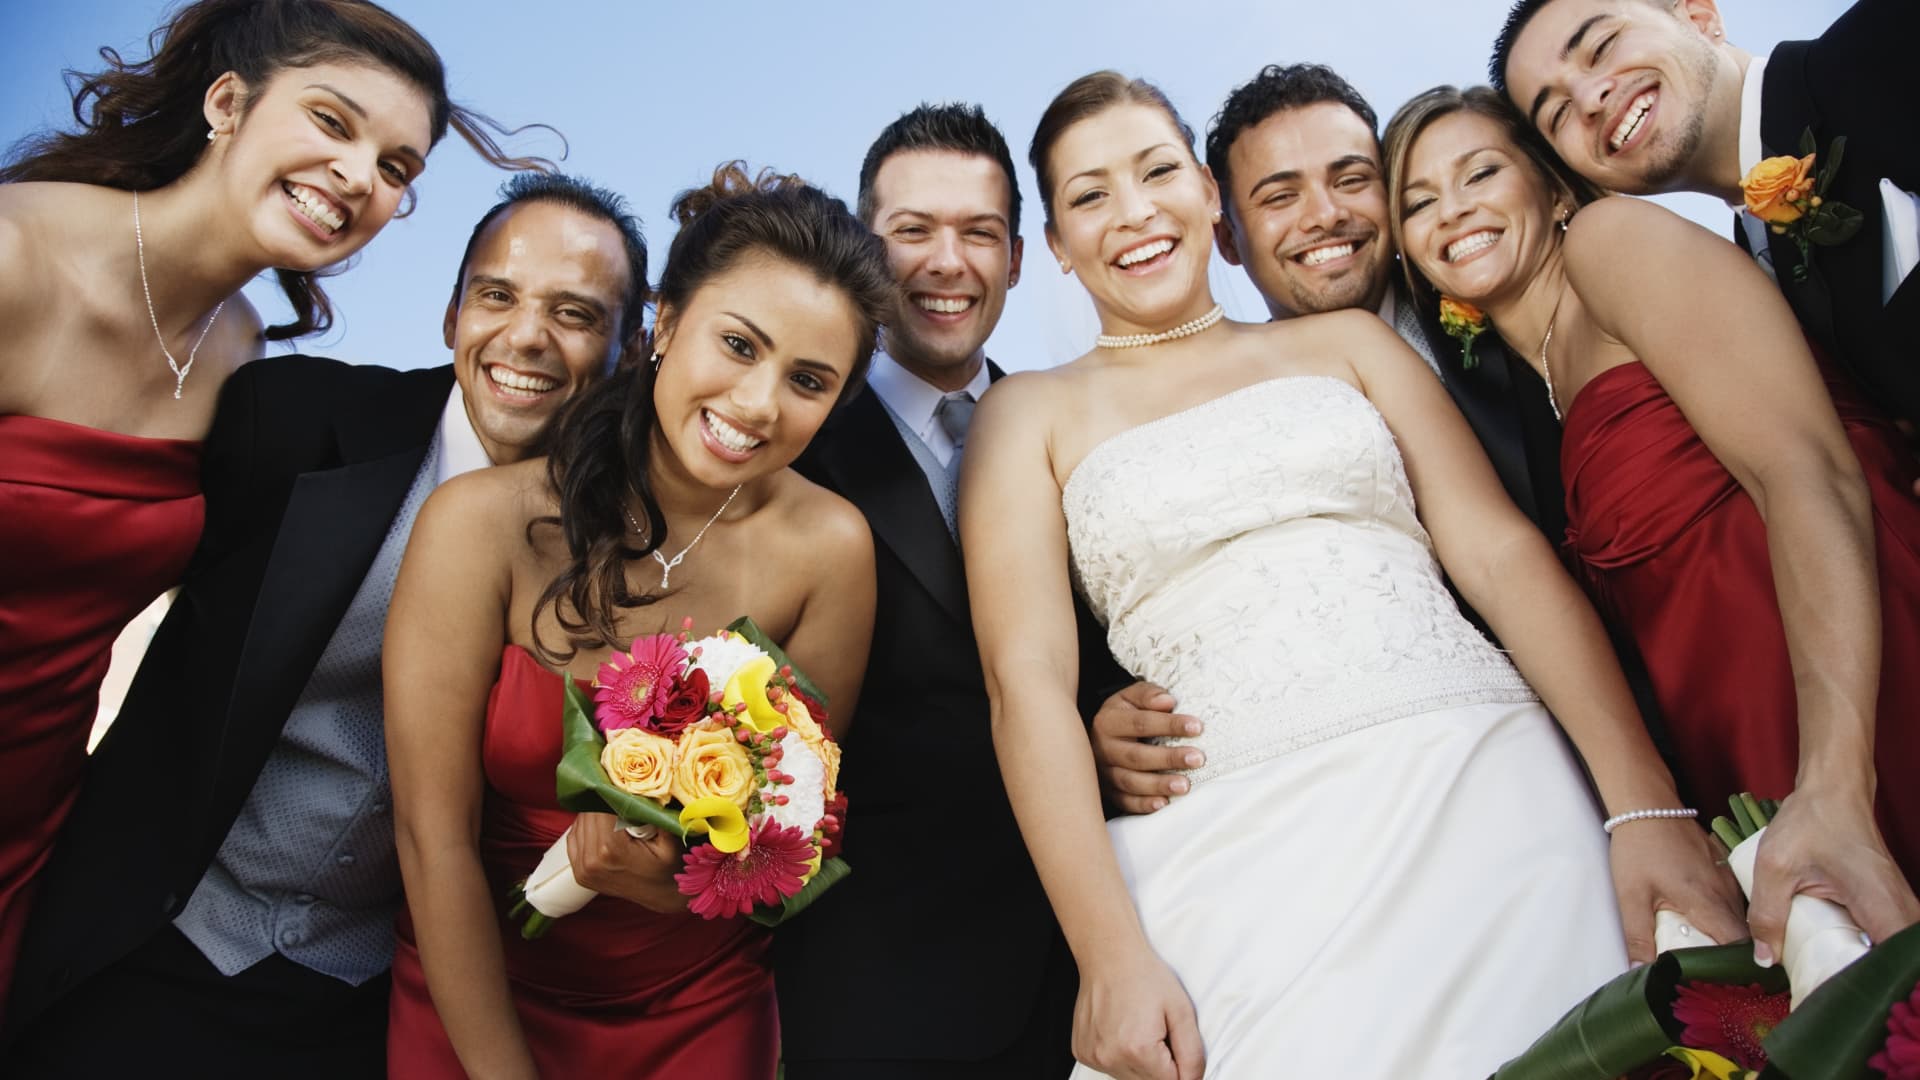 Being in a wedding party costs an average $825. Here's how to avoid debt and regret